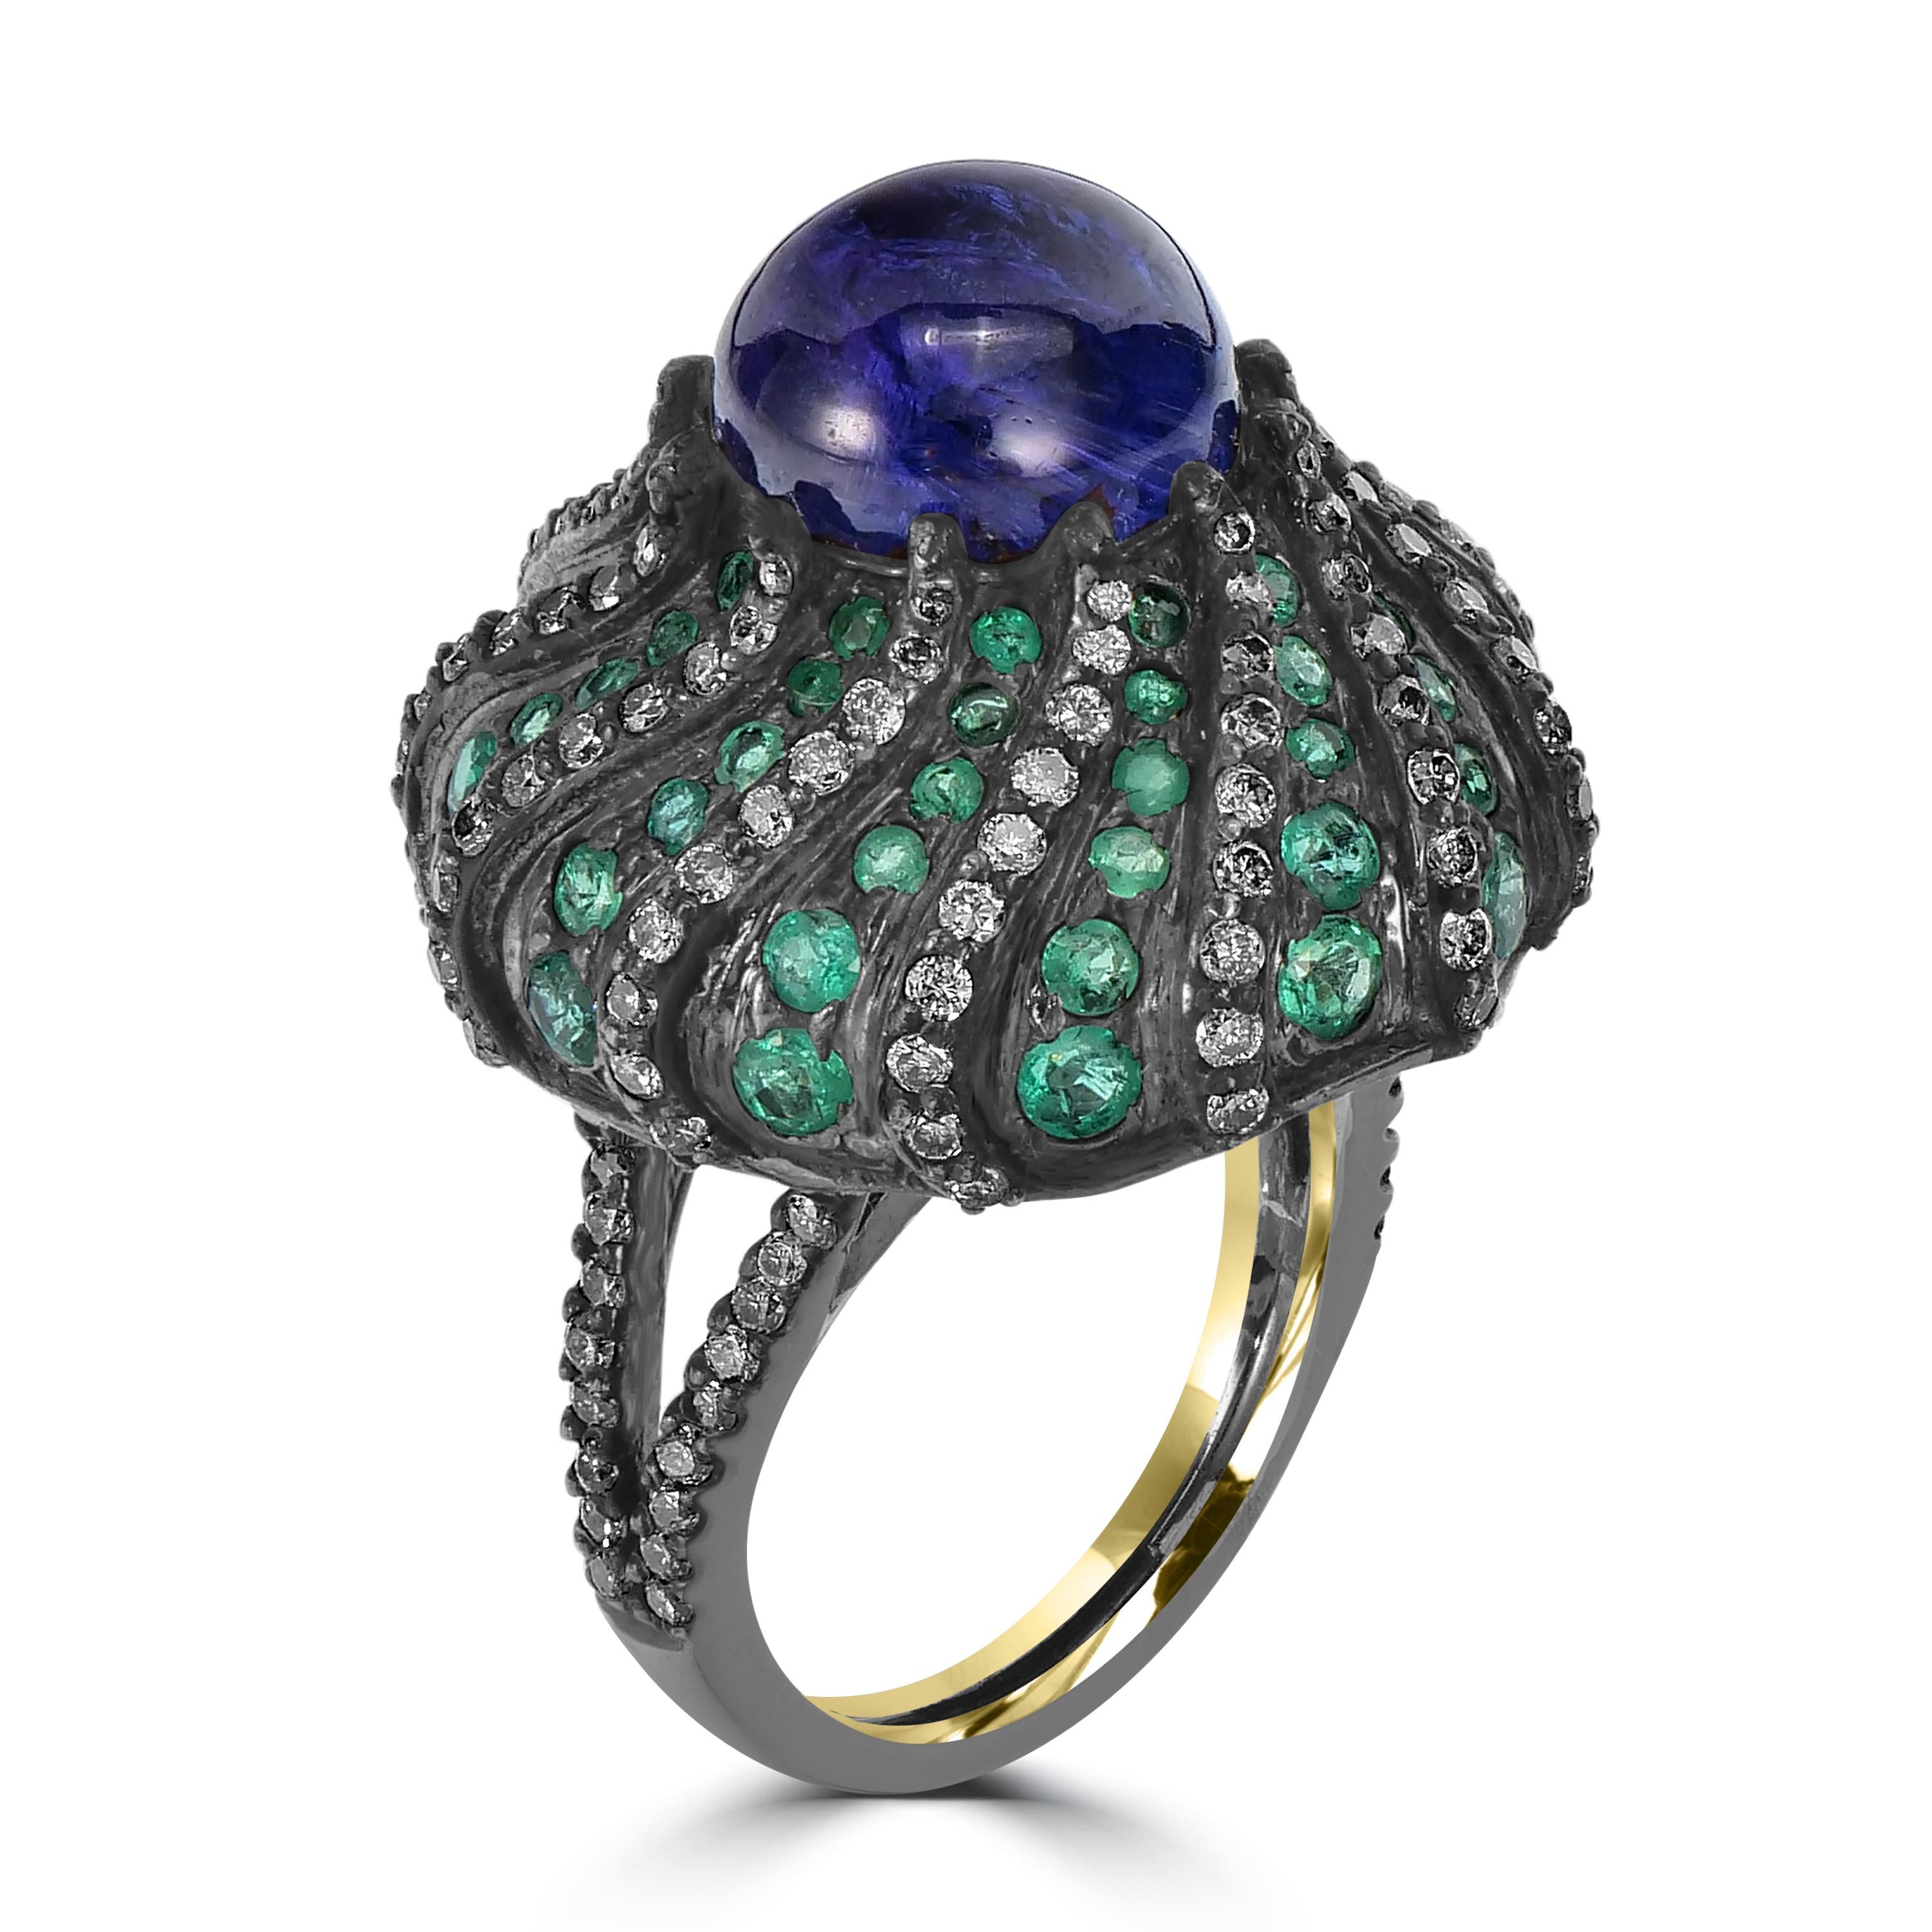 Step into the glamour of the Victorian era with the 11.5 Cttw. Tanzanite, Emerald, and Diamond Split Shank Dome Ring — a mesmerizing blend of timeless elegance and contemporary design. The head of this exquisite ring resembles a rising cone or